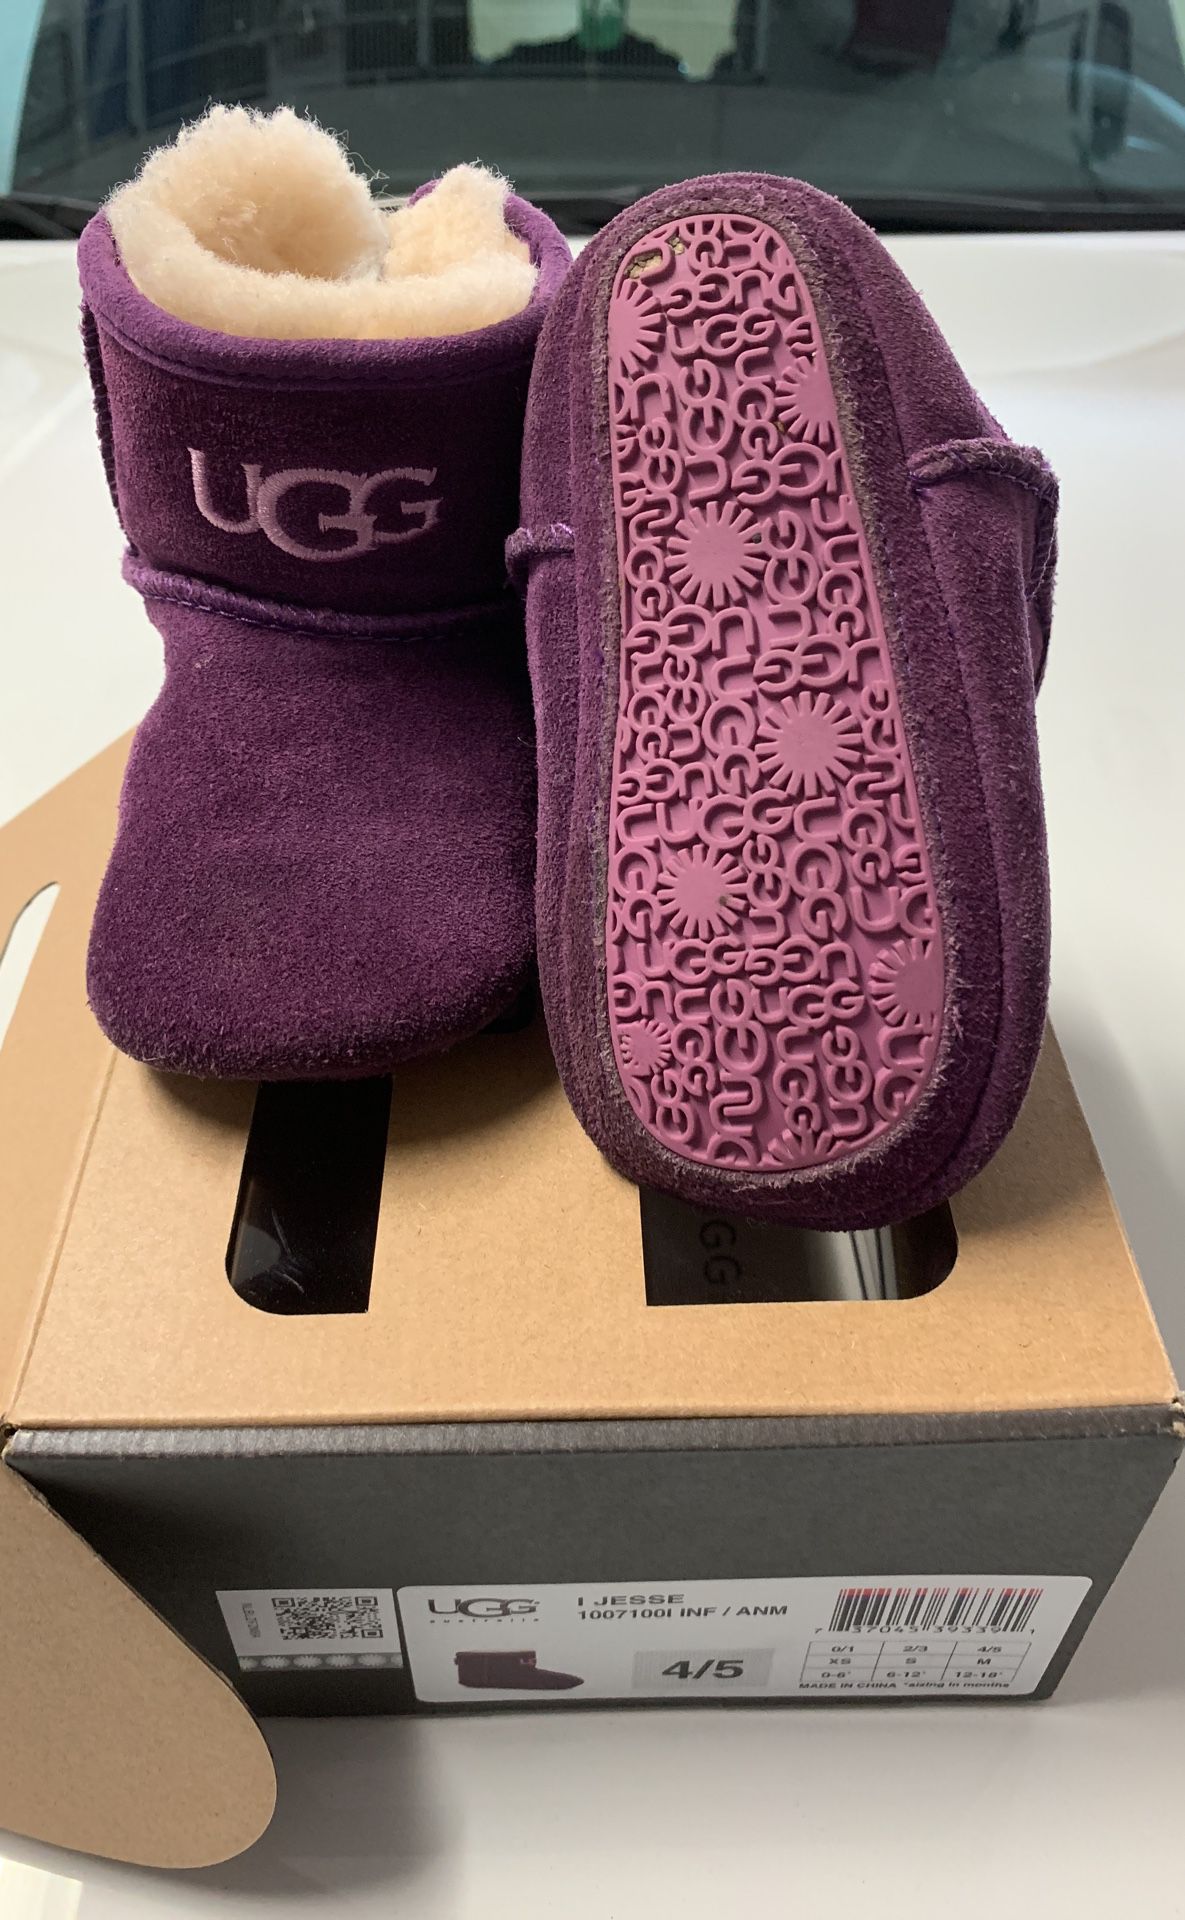 Ugg boots. Toddler 4/5. Purple